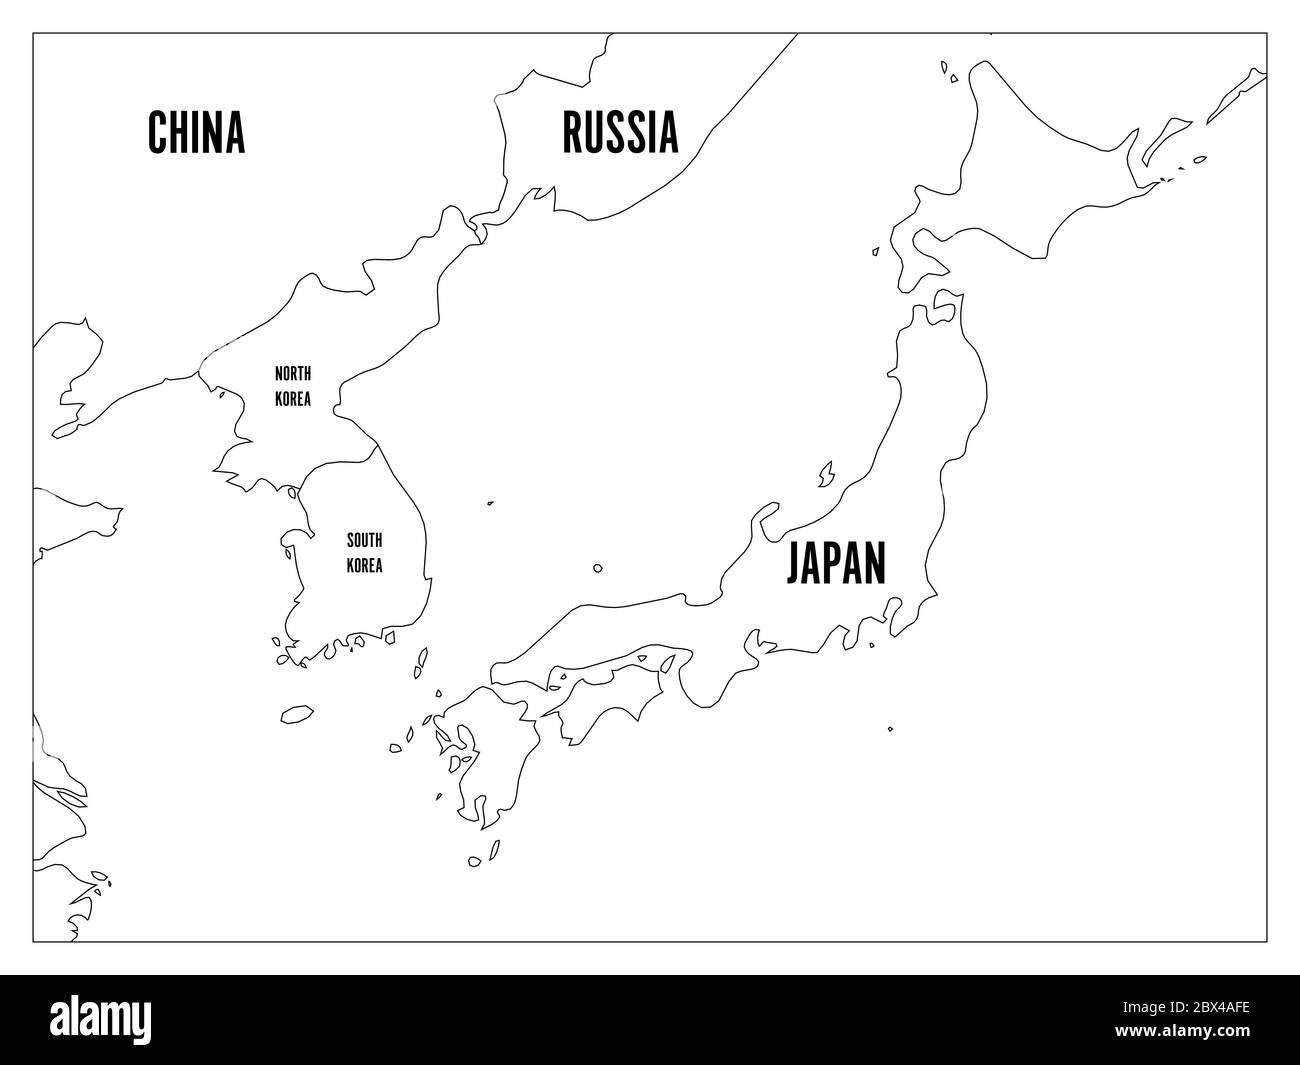 Political Map Of Korean And Japanese Region South Korea North Korea And Japan Black Outline Map With Black Labeling On White Background Vector Illustration Stock Vector Image Art Alamy